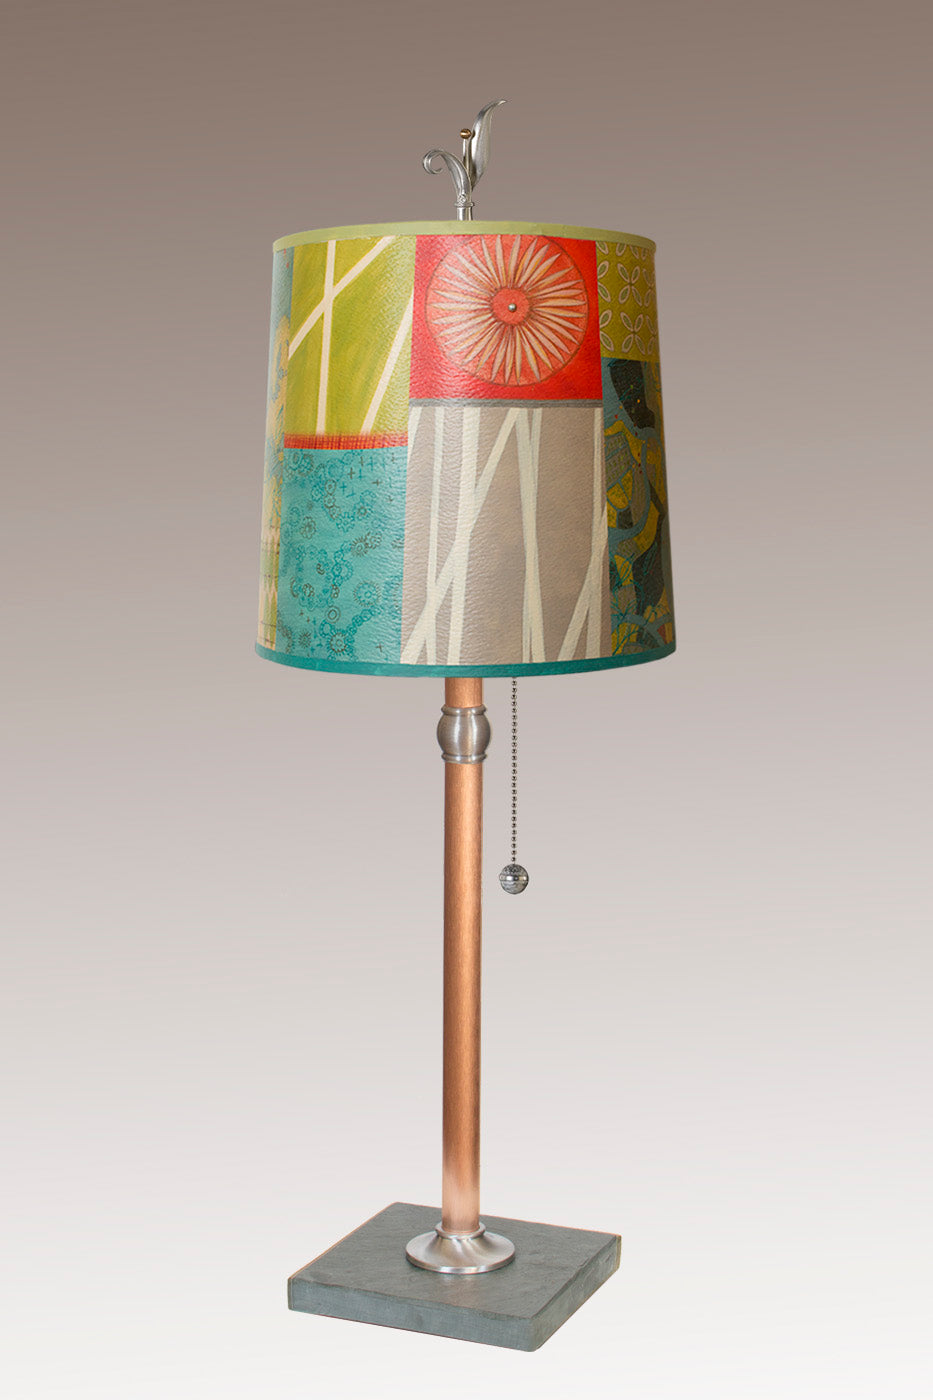 Janna Ugone & Co Table Lamps Copper Table Lamp with Medium Drum Shade in Zest